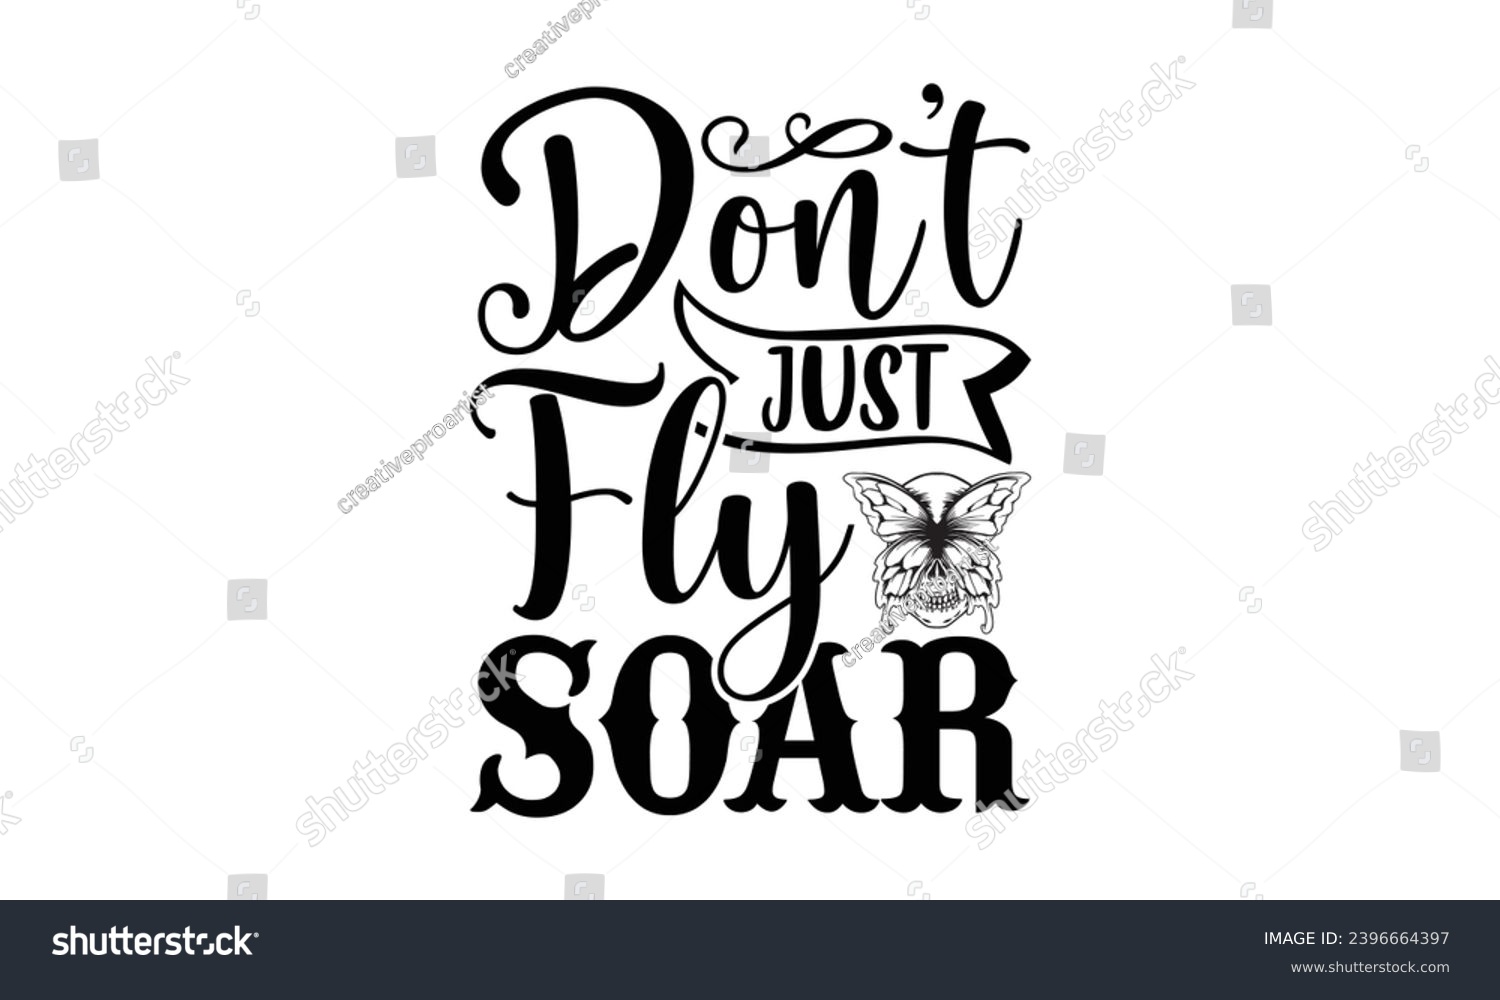 SVG of don’t just fly soar- Butterfly t- shirt design, Handmade calligraphy vector illustration for Cutting Machine, Silhouette Cameo, Cricut, Vector illustration Template eps svg